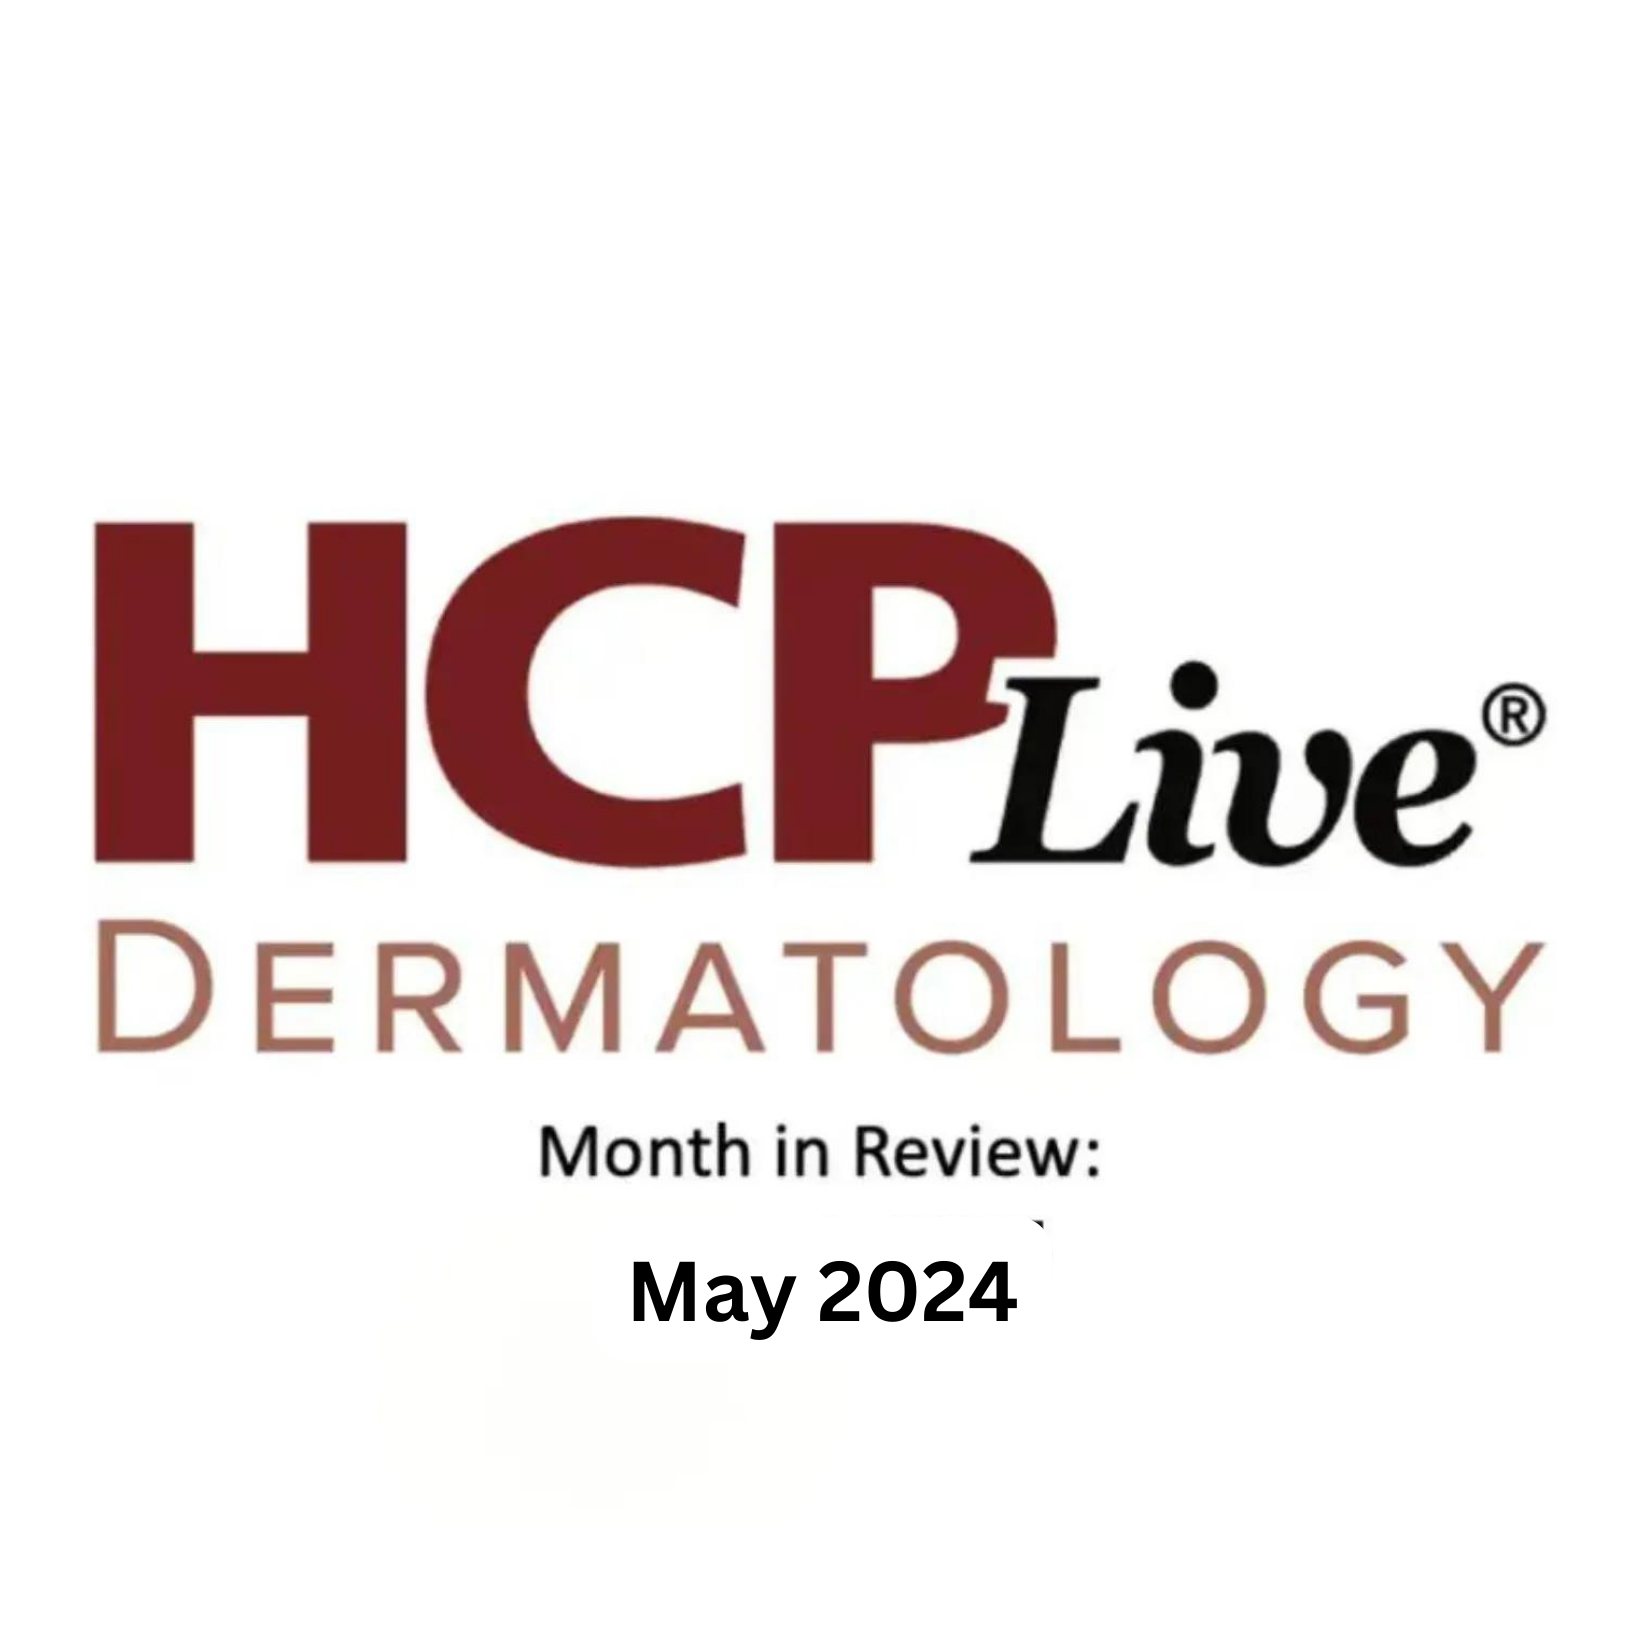 Dermatology Month in Review: May 2024